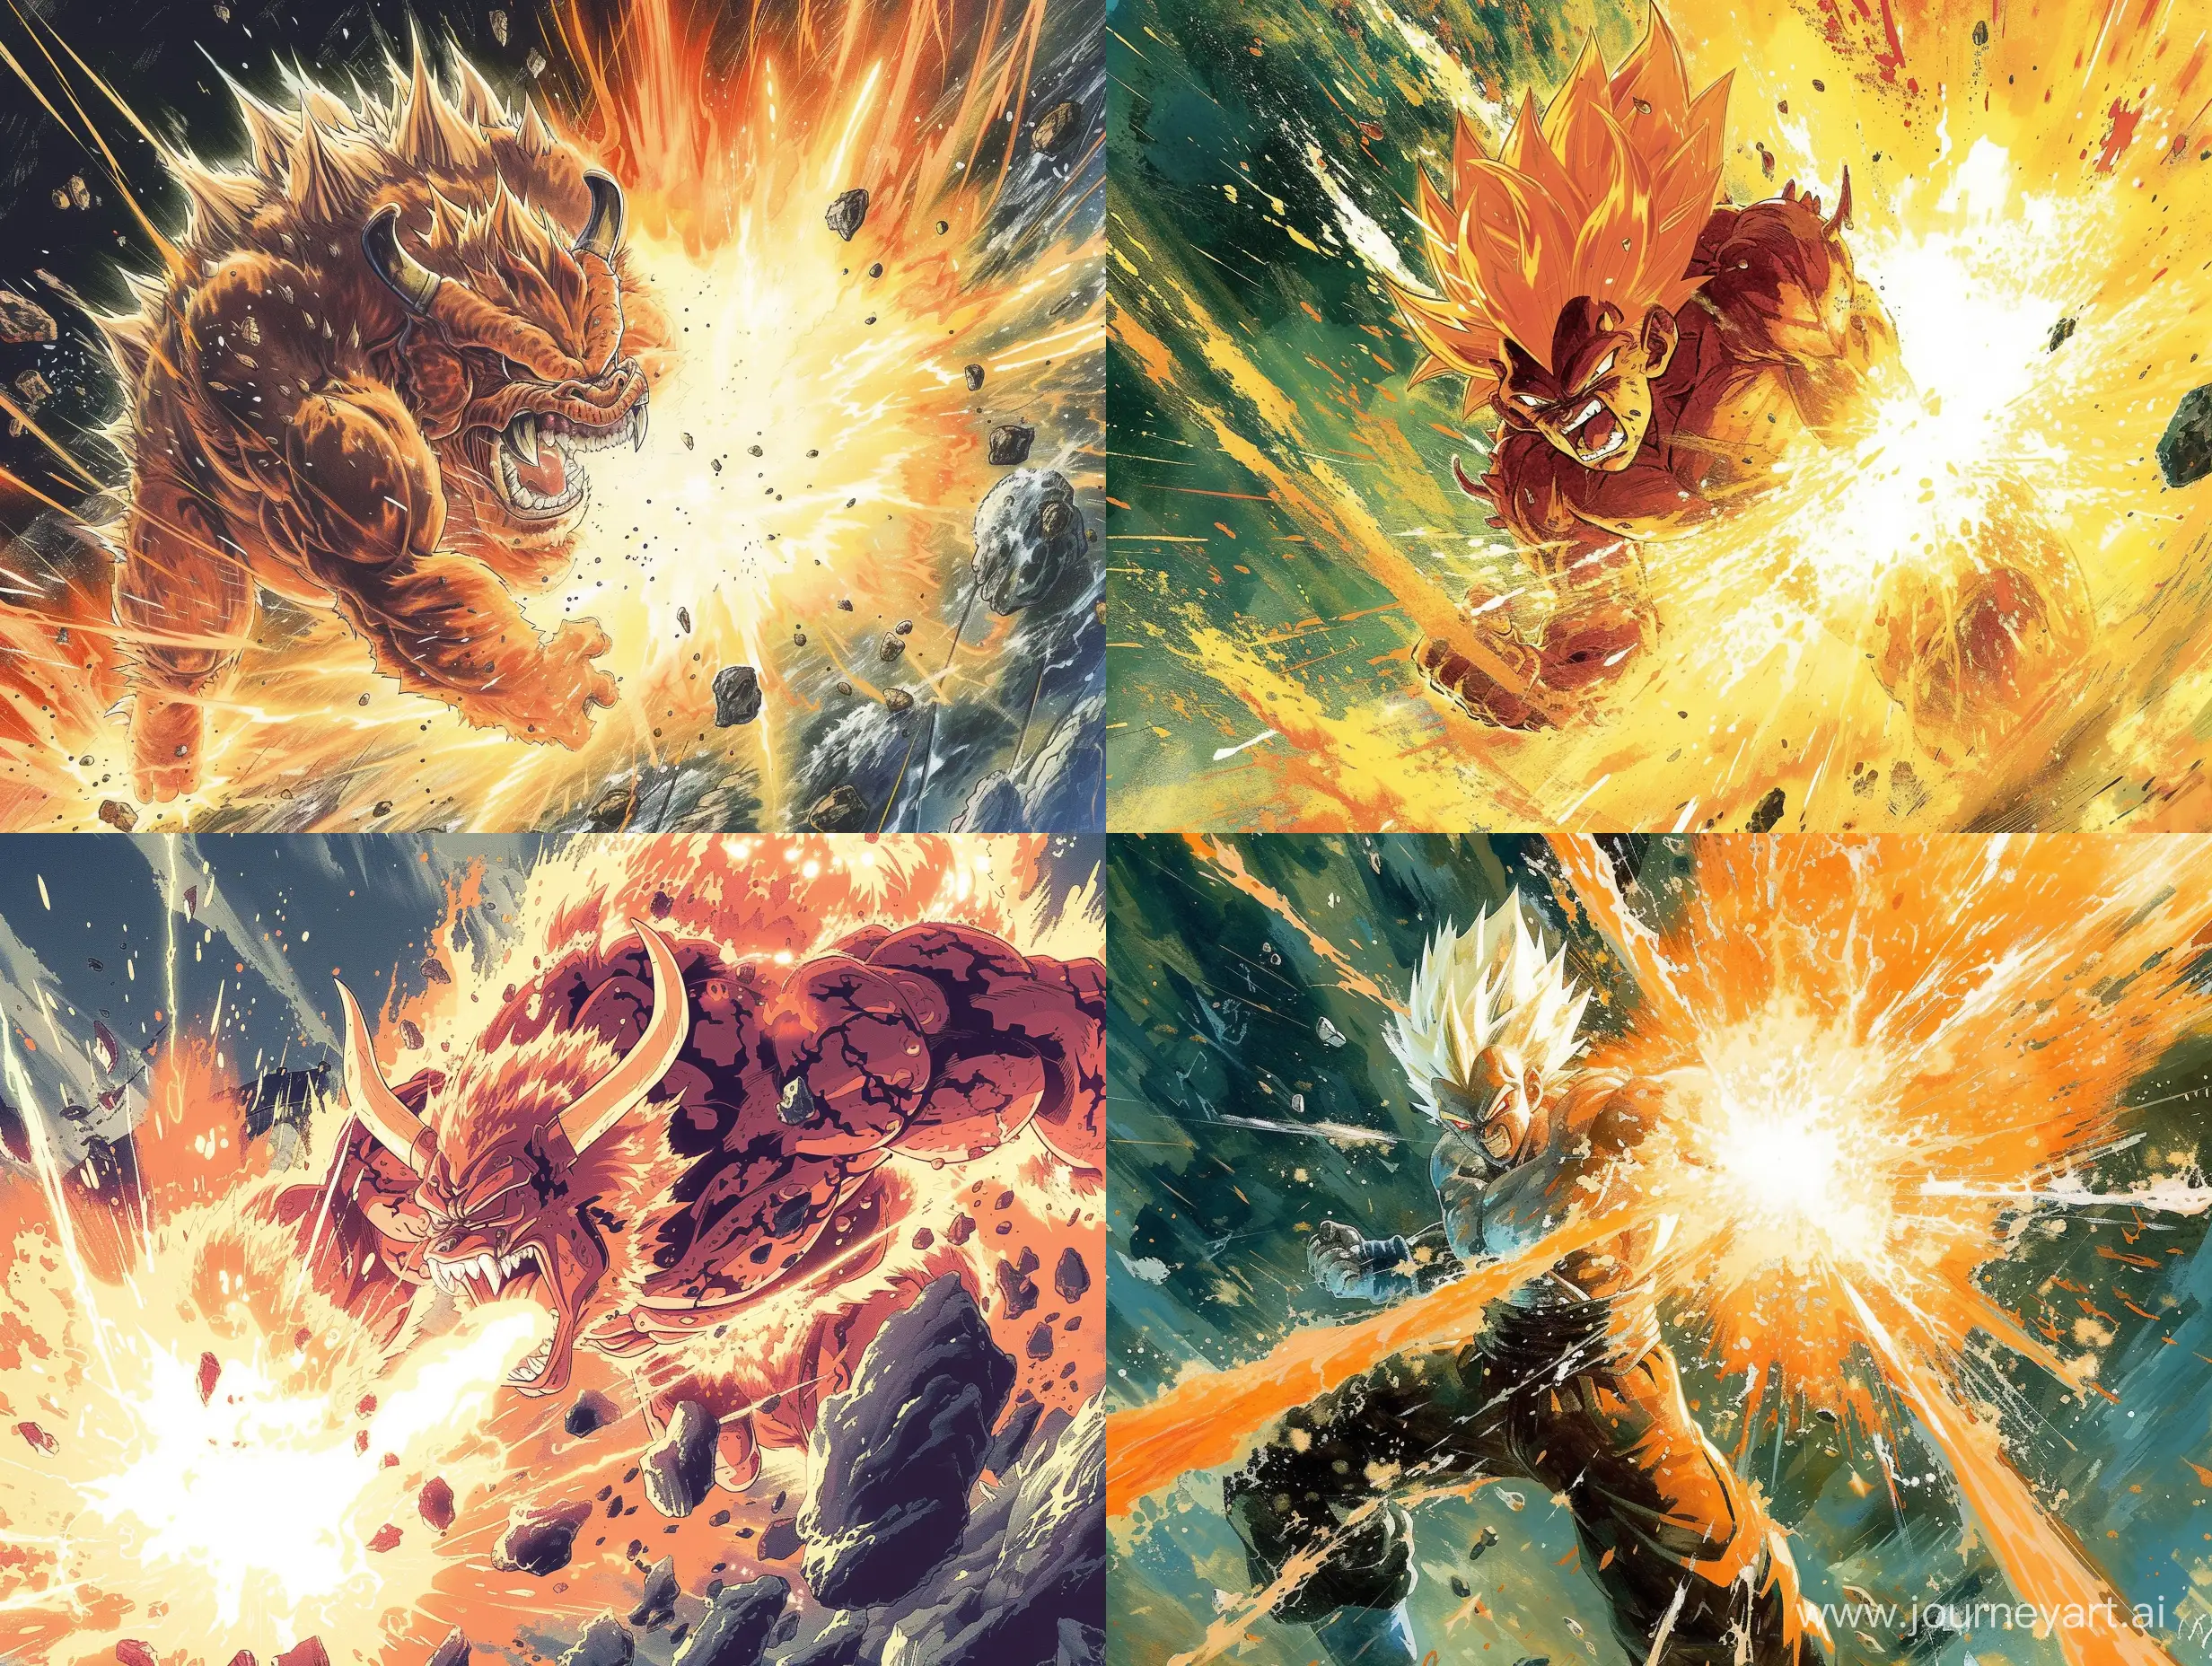 In the distinct and energetic Toriyama style, emblematic of Dragon Ball Z, the illustration showcases a formidable demon unleashing a ki blast. The environment around the demon bristles with the kinetic energy of the attack, rendered in the explosive color contrasts and dramatic shading characteristic of Toriyama's legendary design.